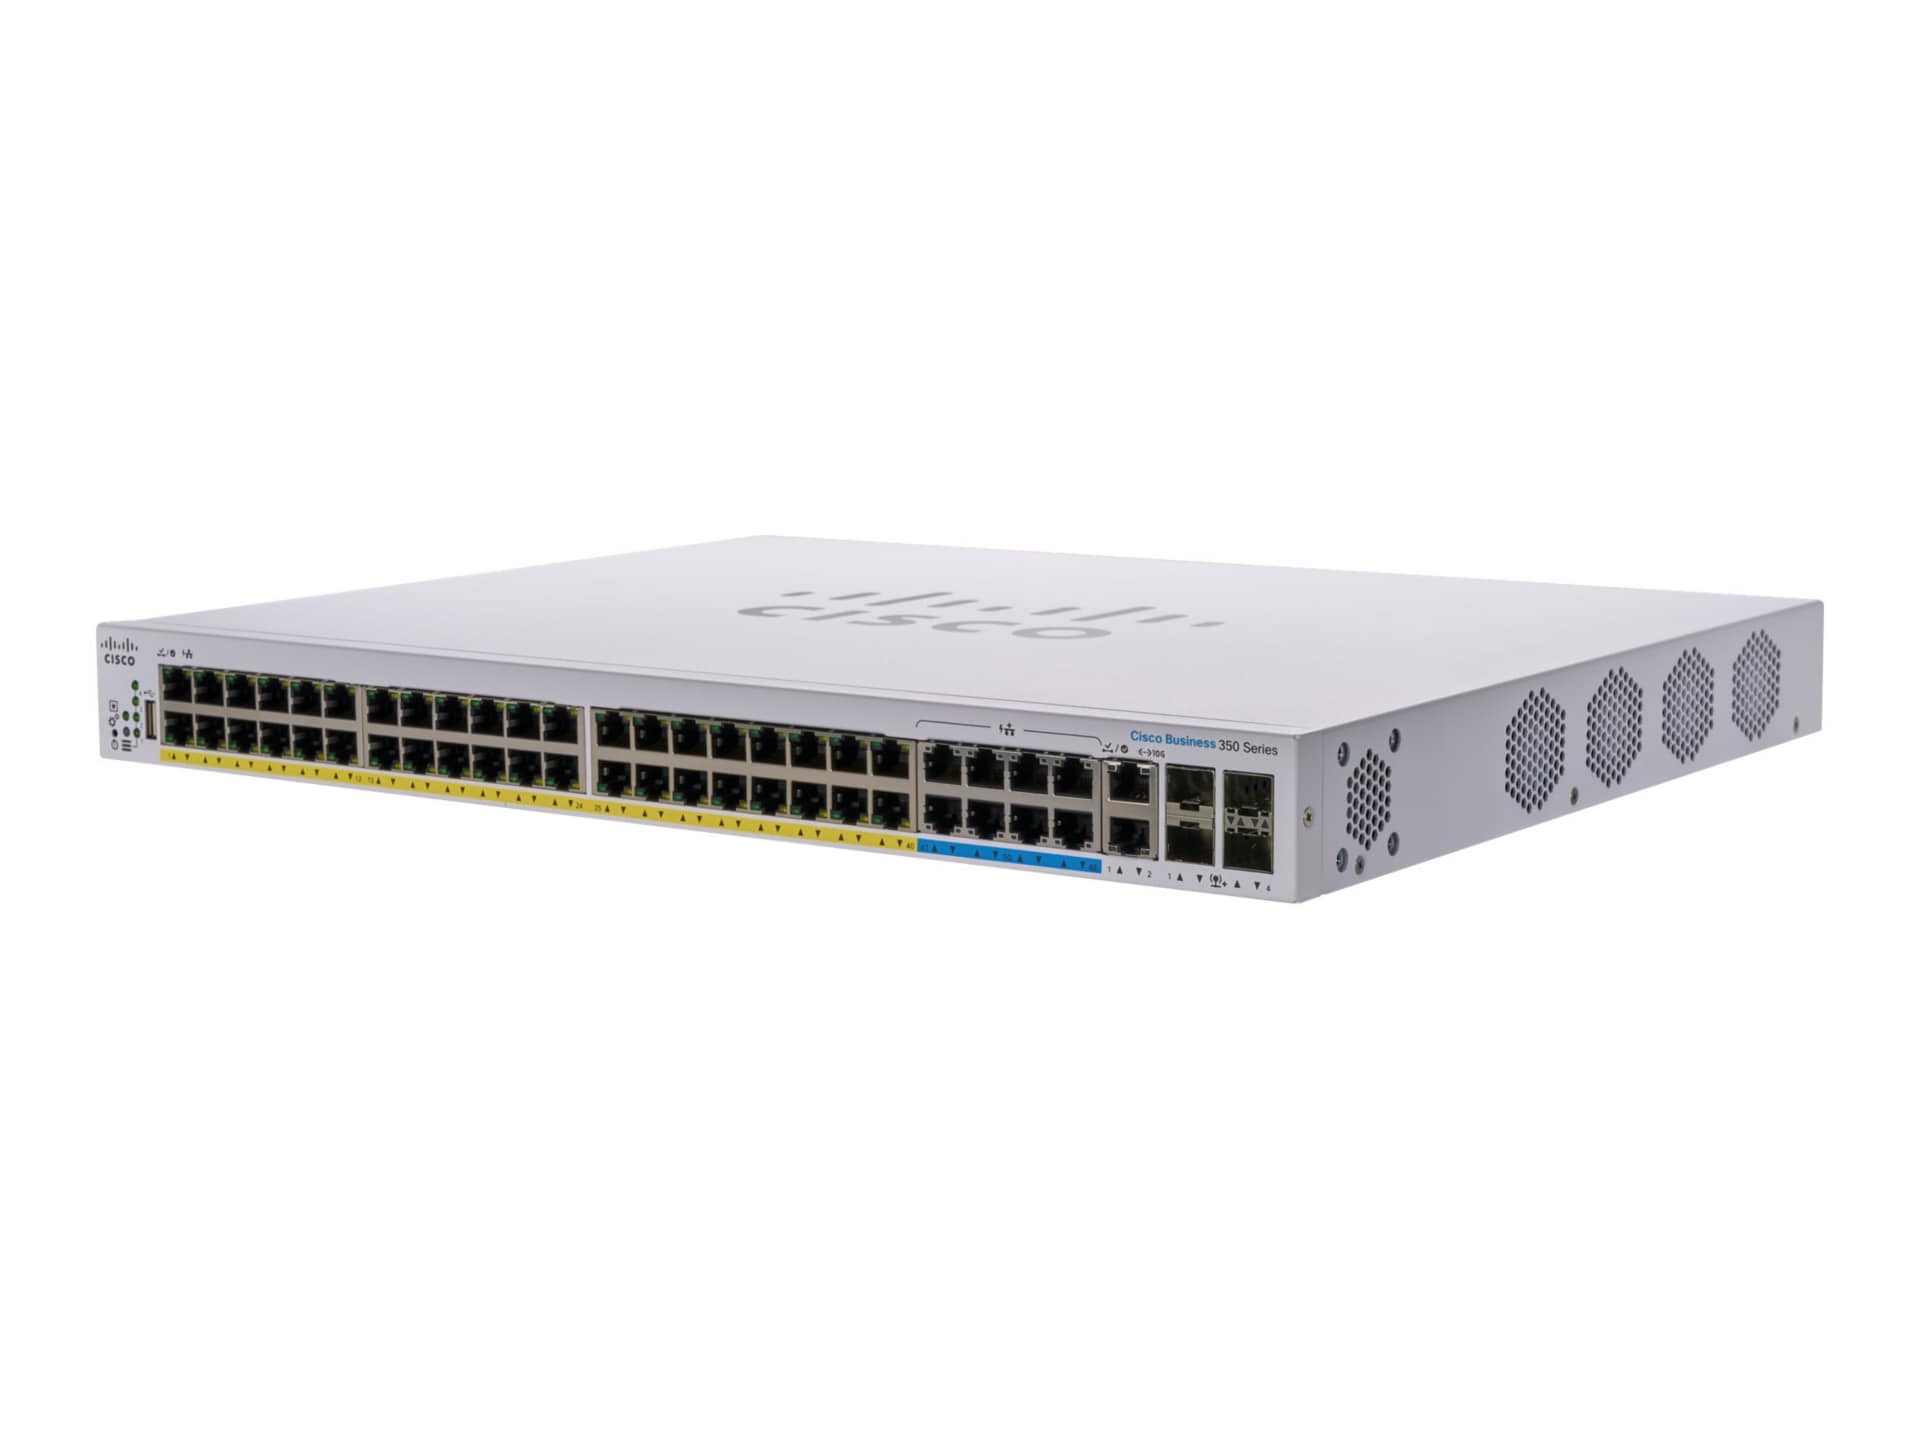 Cisco Business 350 Series 350-48NGP-4X - switch - 48 ports - managed - rack